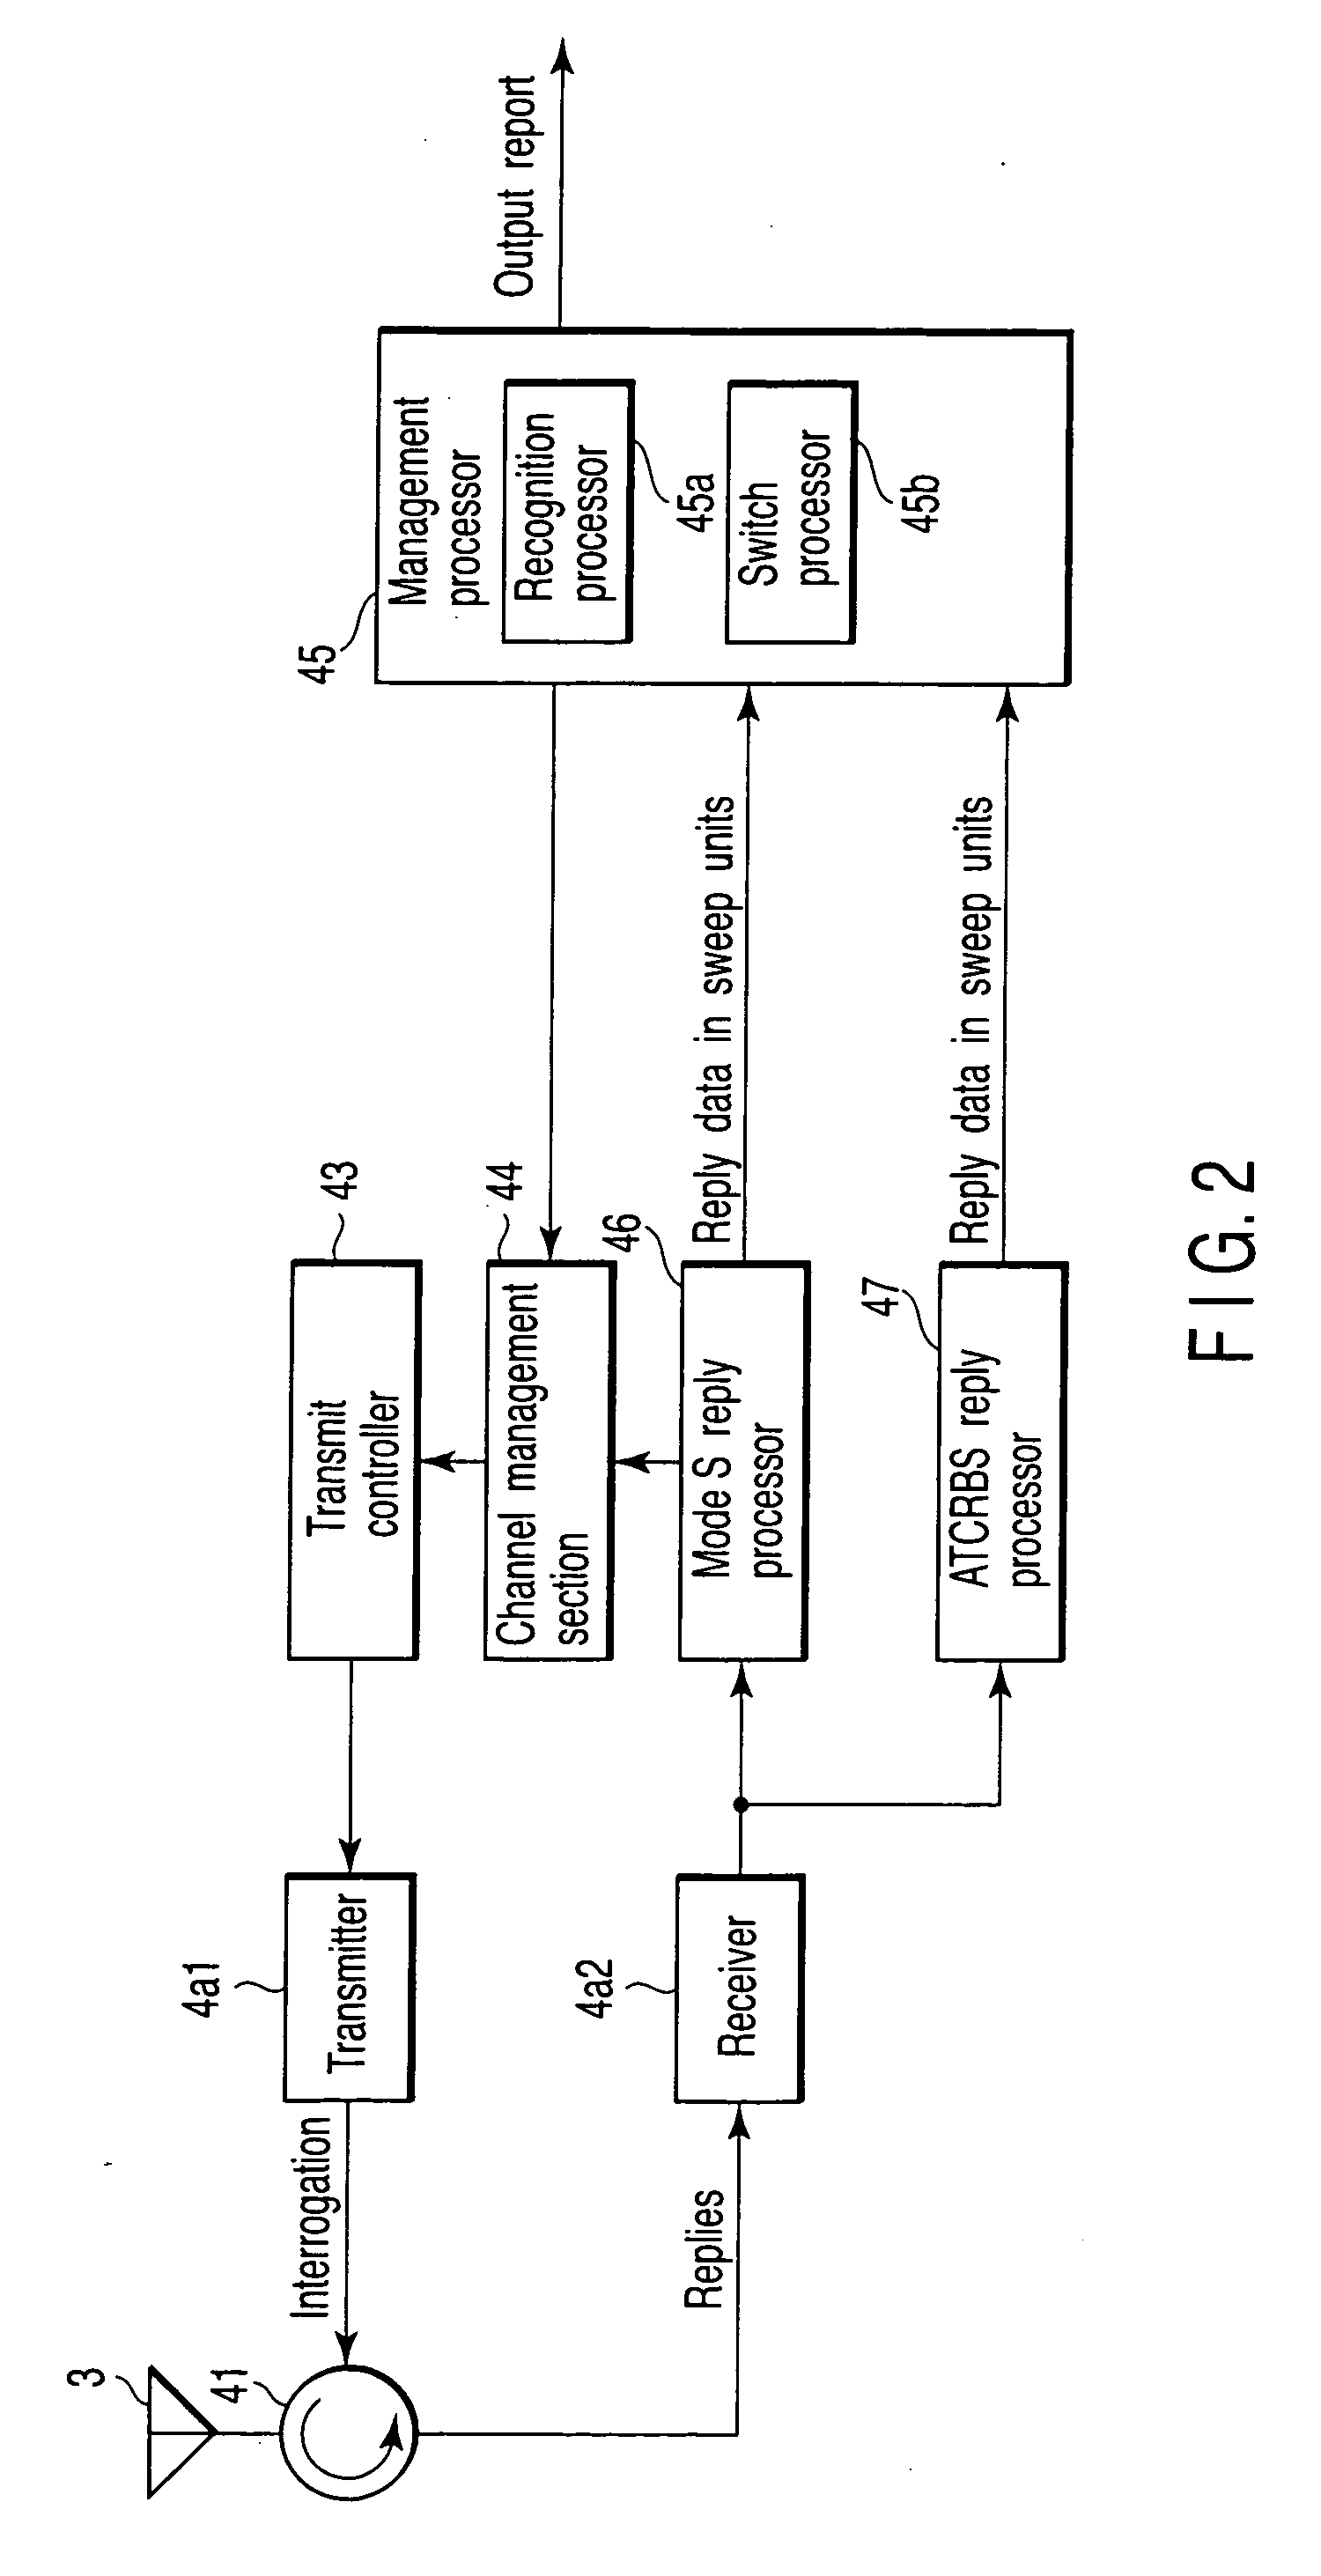 Secondary surveillance radar system, and ground system for use therein